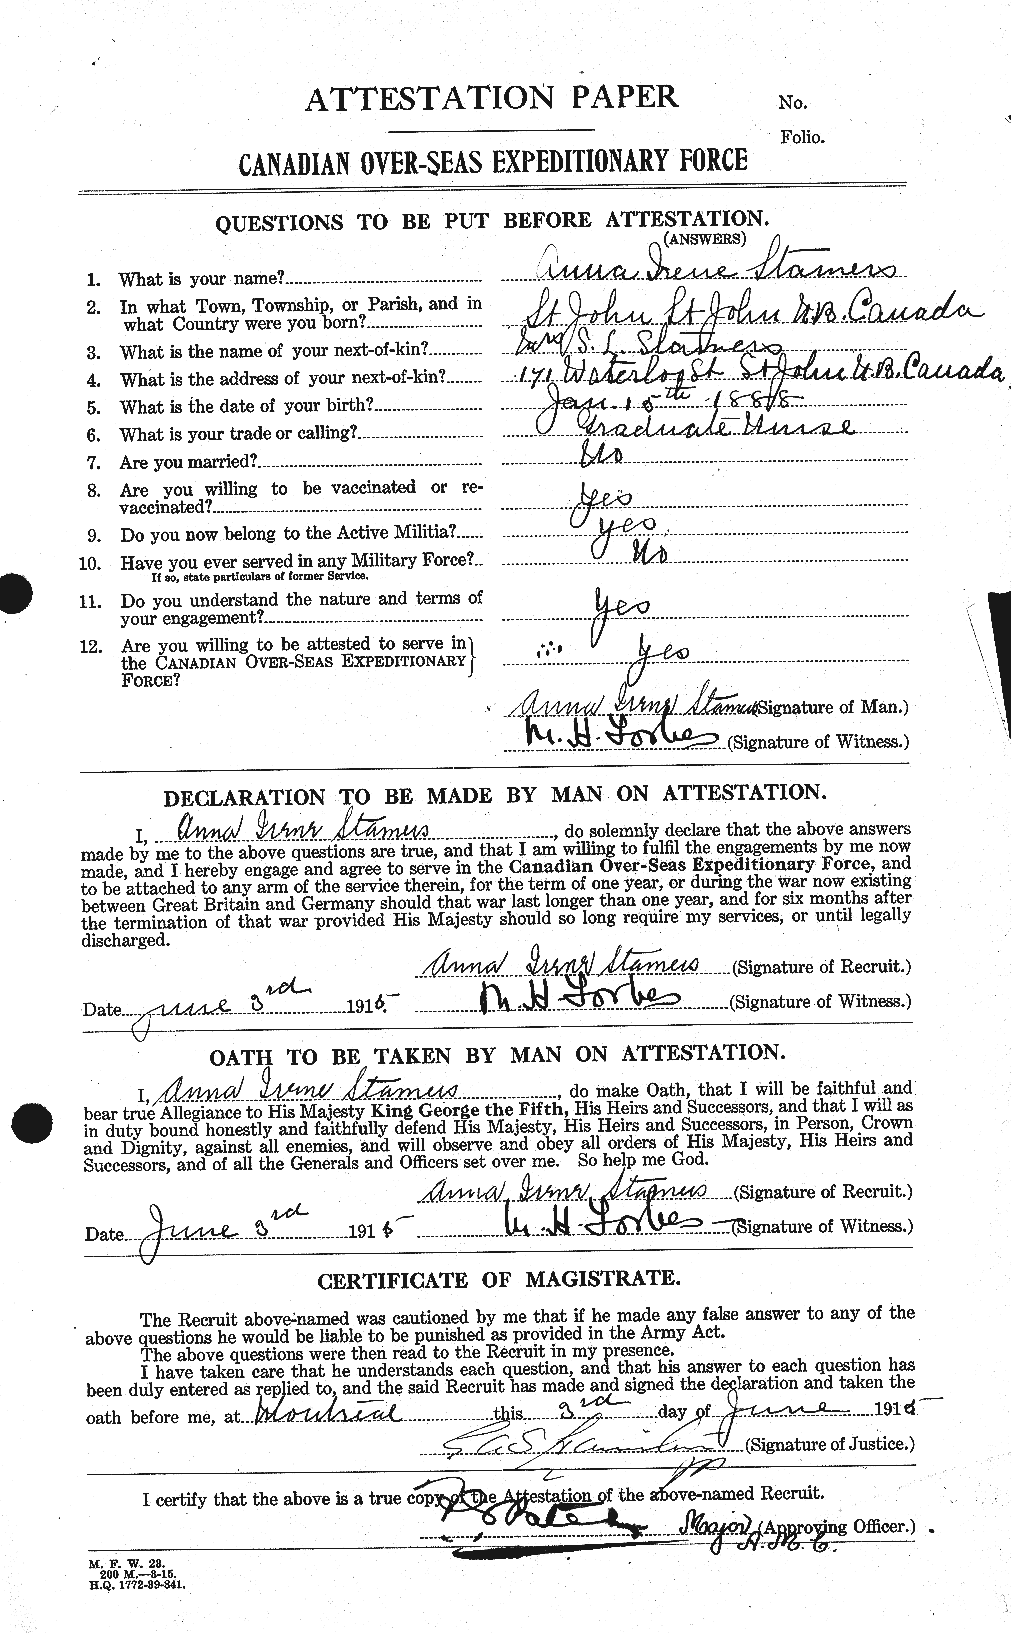 Personnel Records of the First World War - CEF 116507a